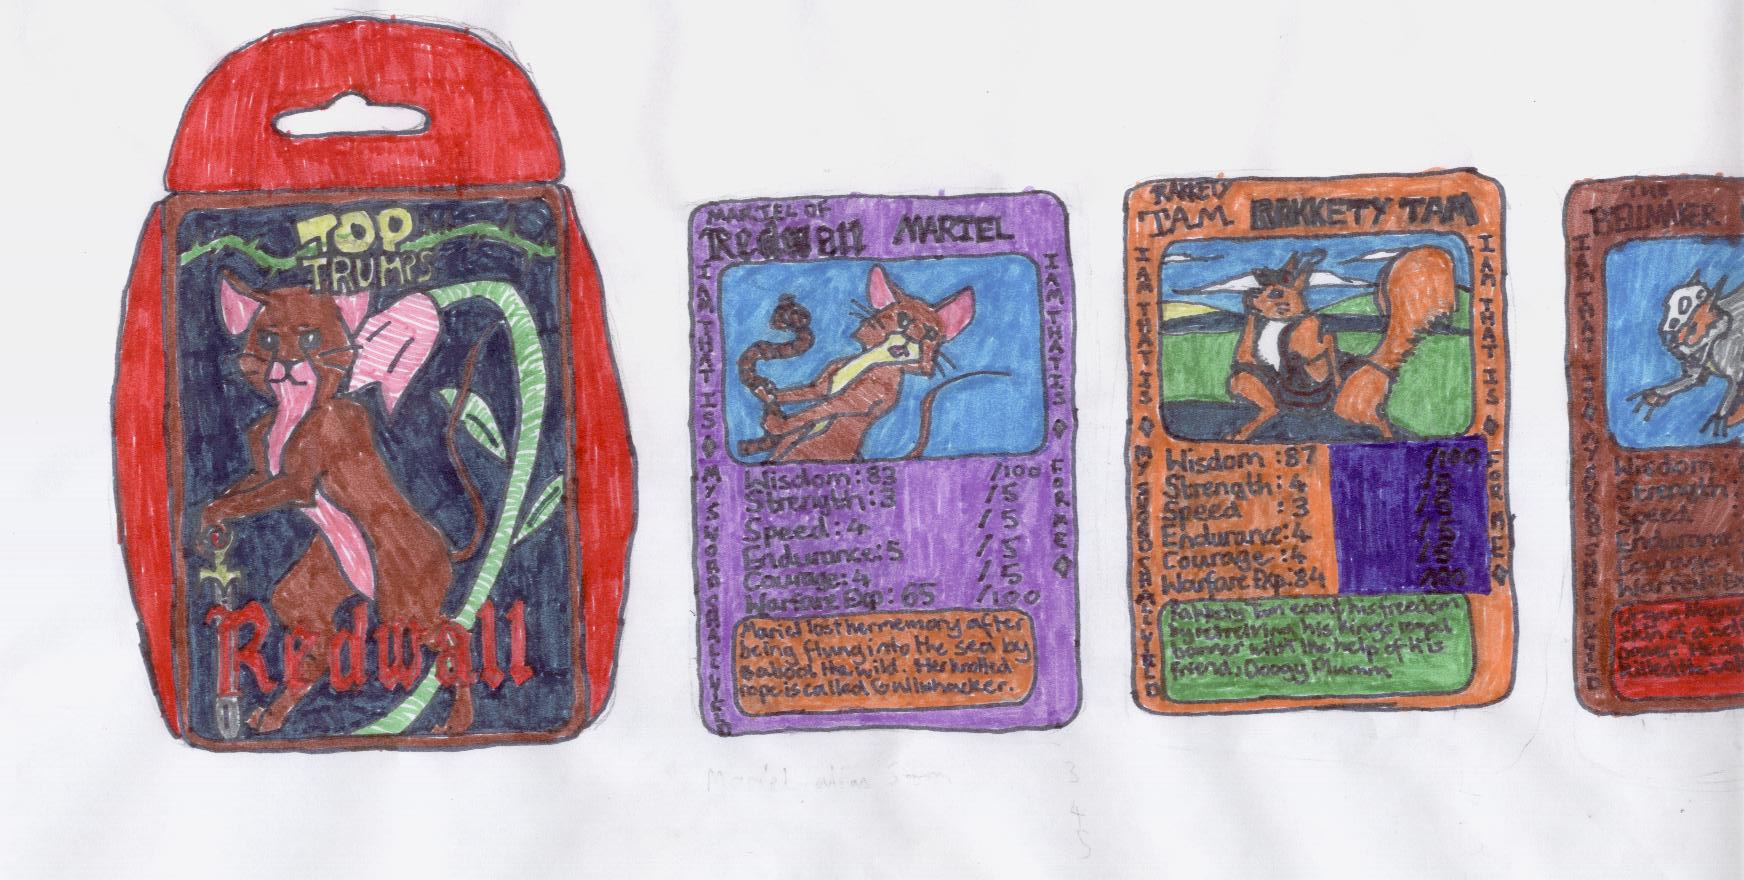 Redwall Top Trumps comp. entry by MoonWolf2000